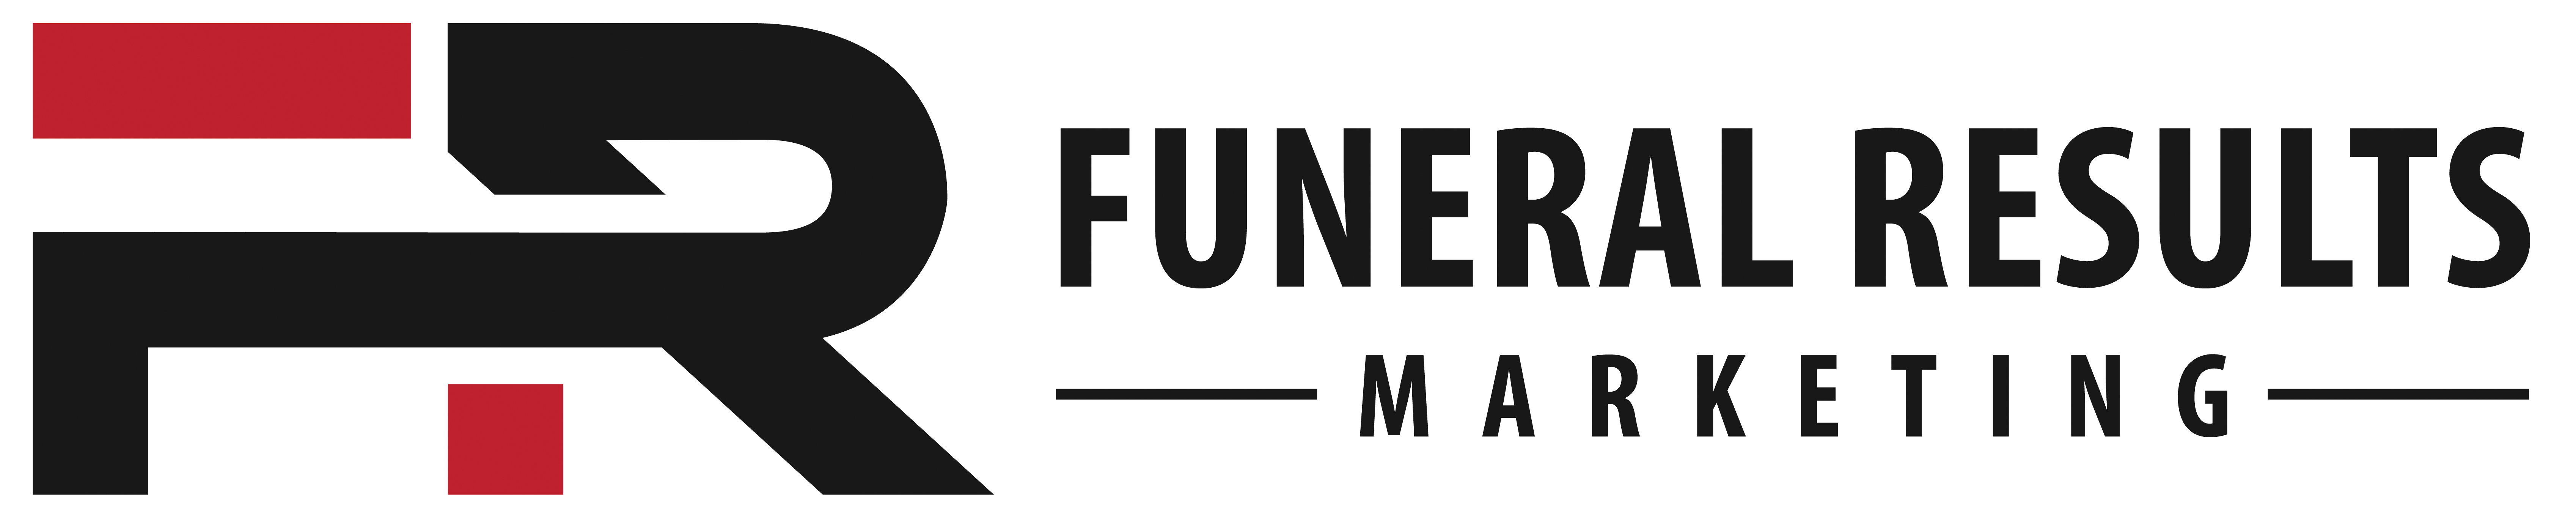 Funeral Results Marketing logo